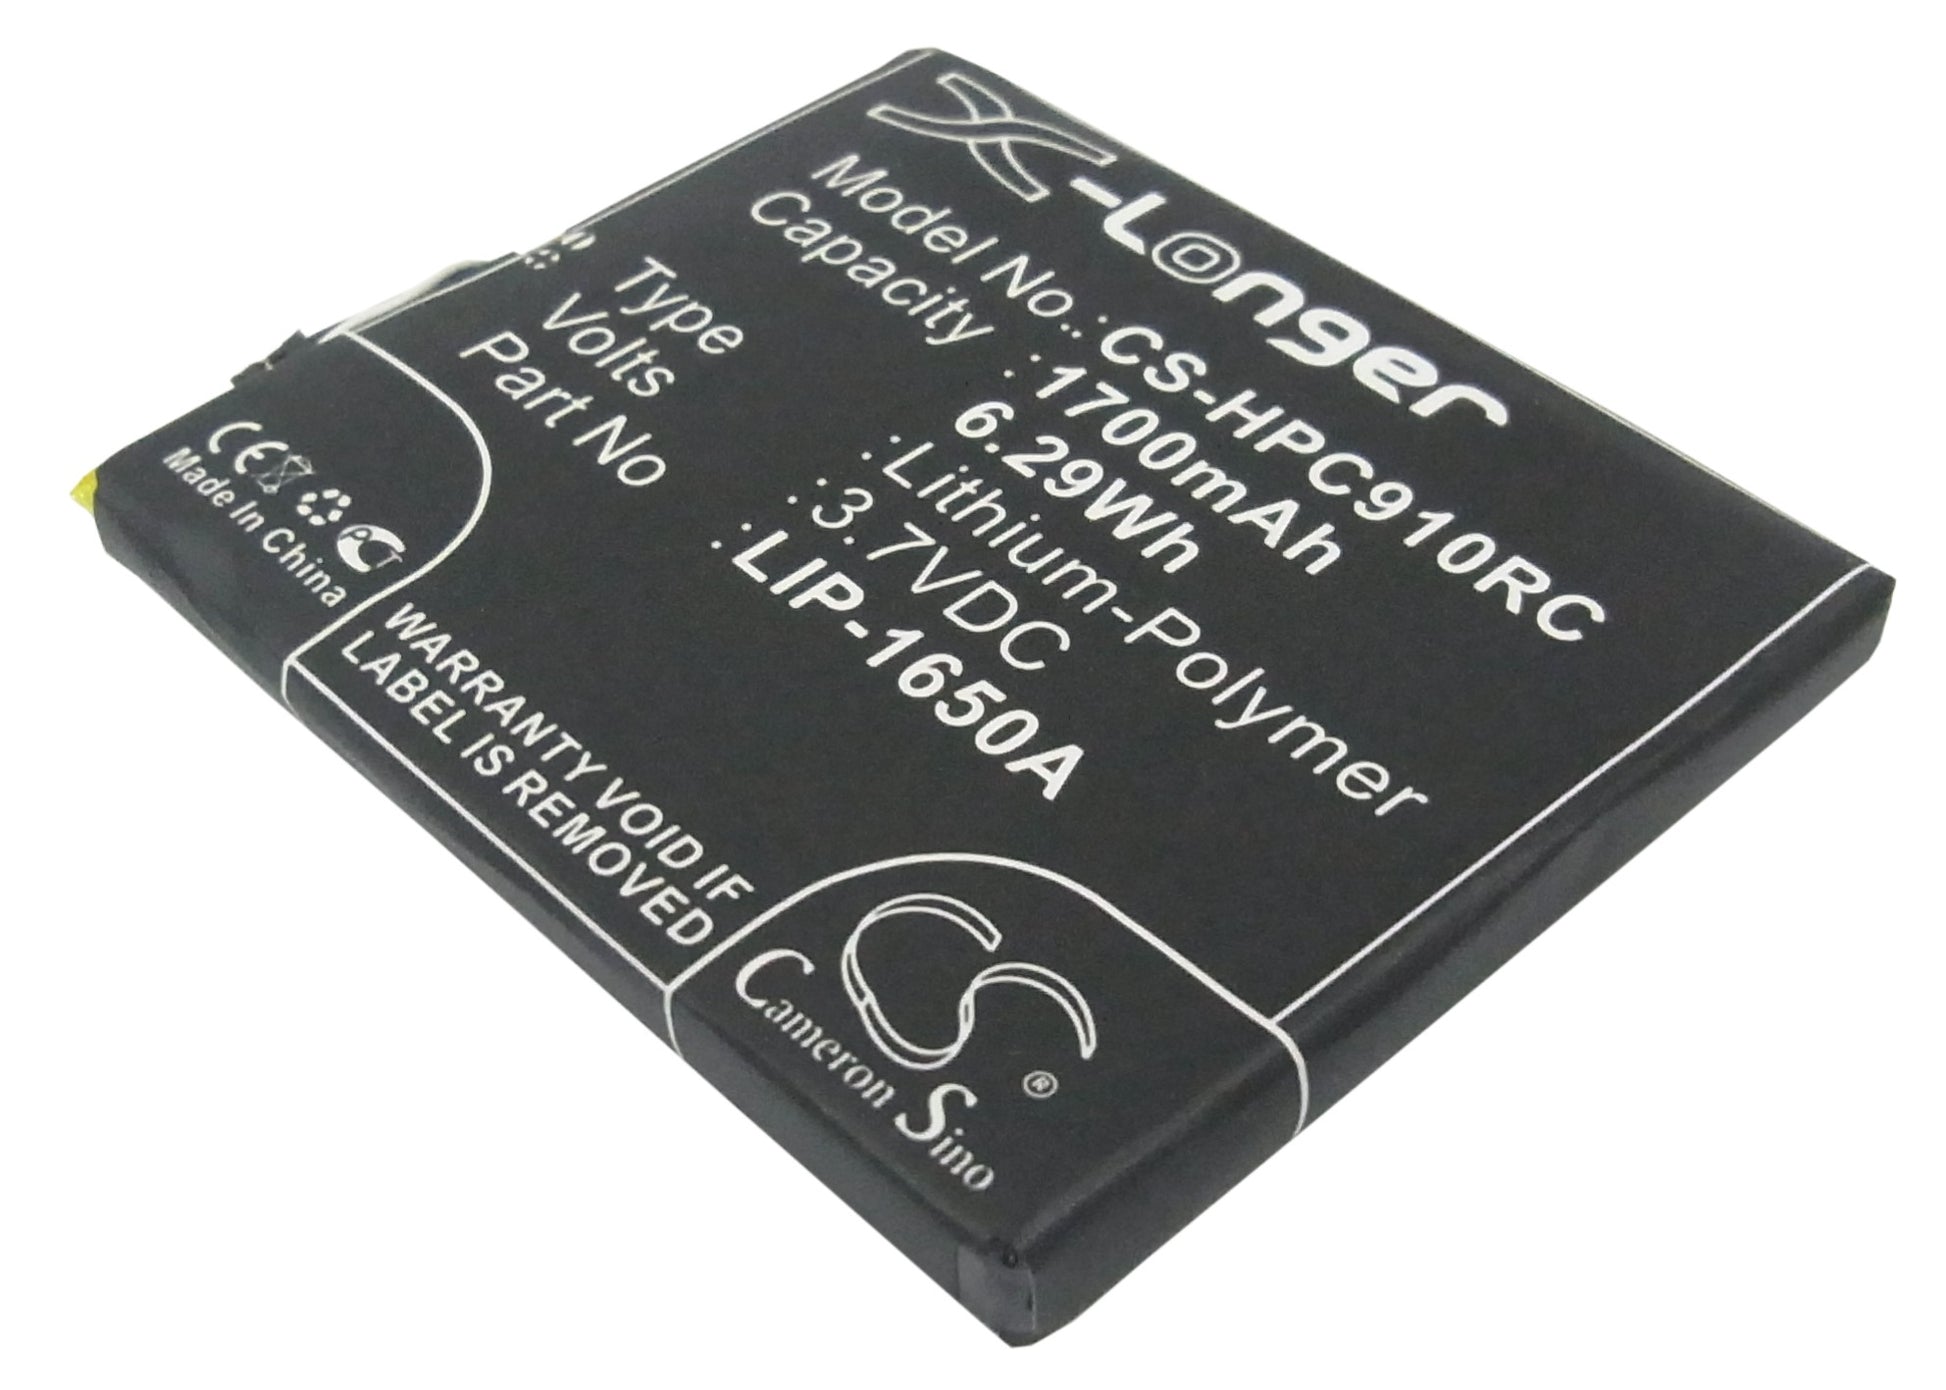 1700mAh LIP-1650A Battery for CLEAR IFM-910CW, IFM-930CW, IMW-C910W, Spot Voyager-SMAVtronics